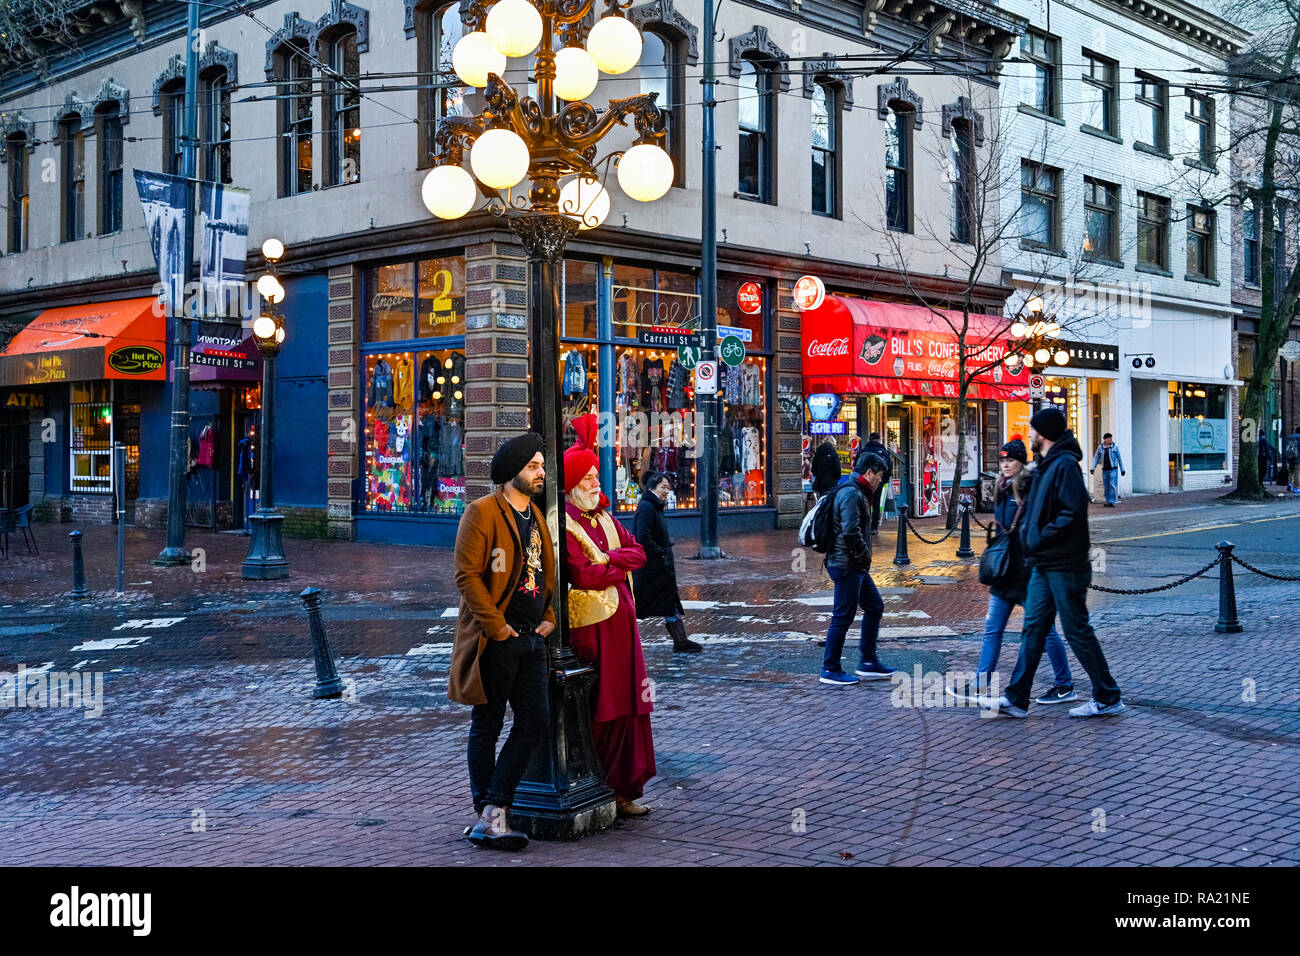 South Asian men with turbans, Gastown, Vancouver, British Columbia, Canada Stock Photo